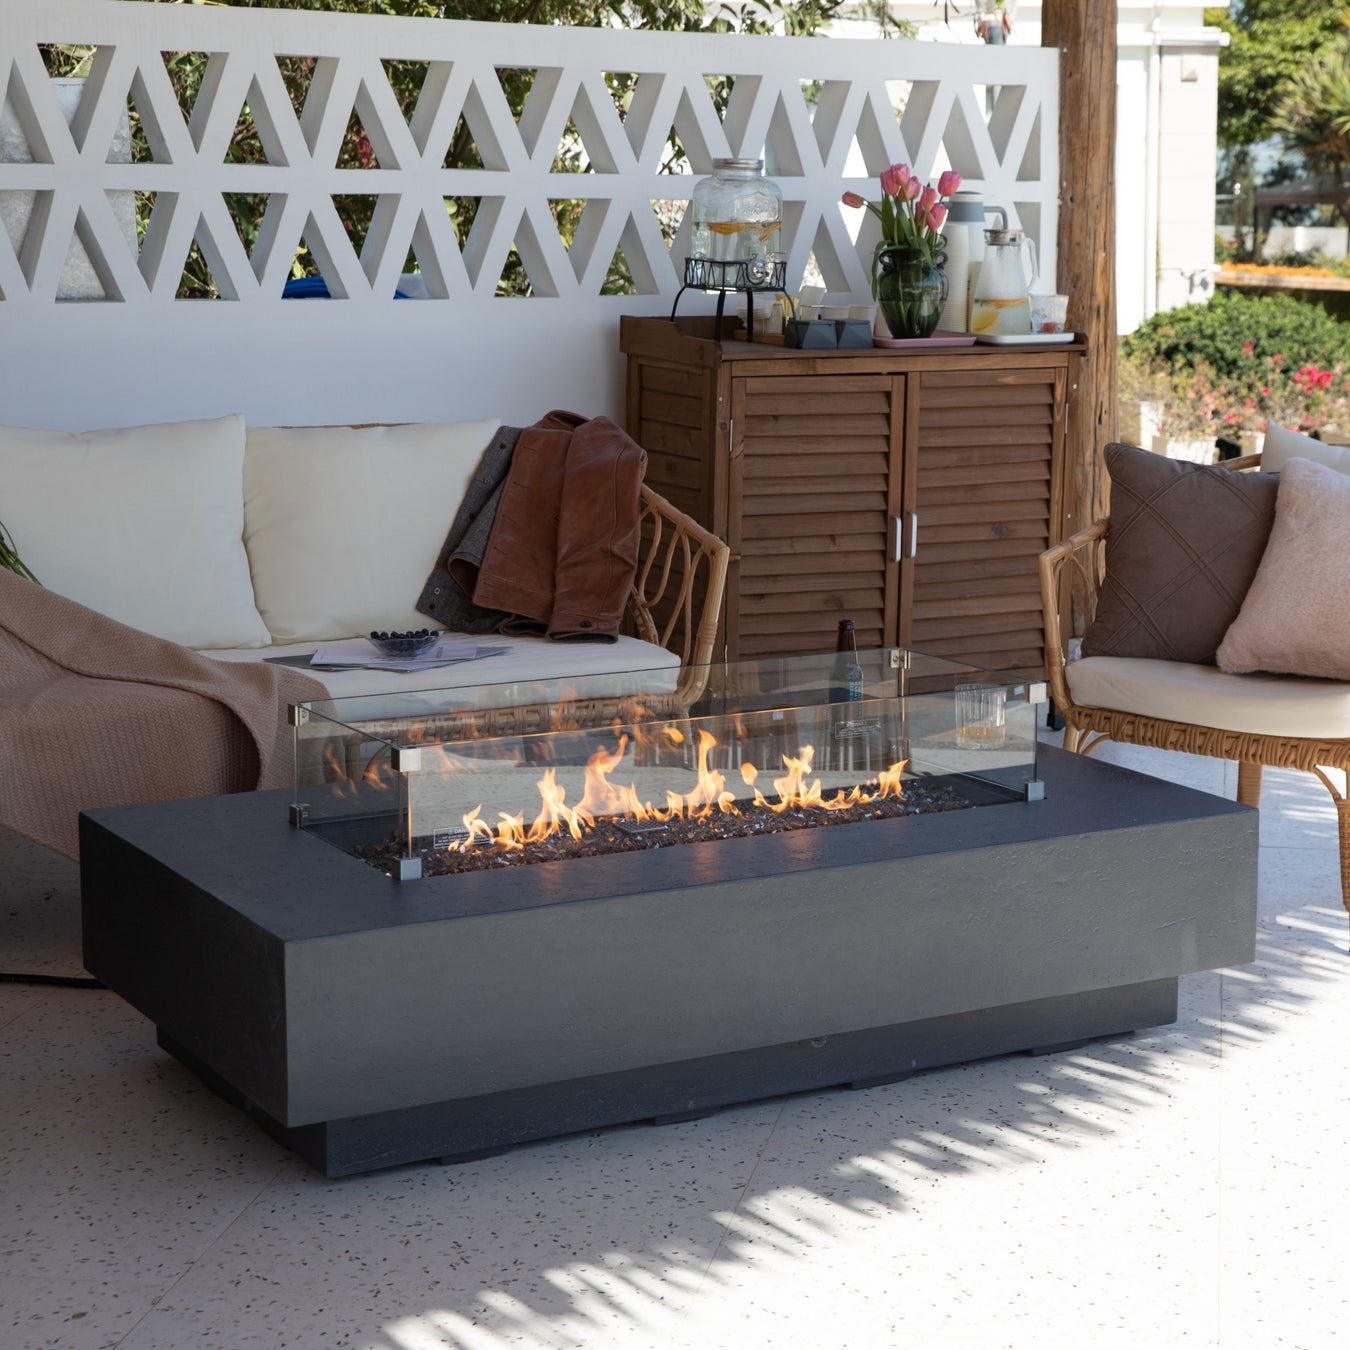 Long concrete grey fire pit table by Suns Lifestyle, glowing with gas-fueled flames, showcased in a beautiful garden with a Mediterranean aesthetic featuring white stone elements. Set against the backdrop of a charming outdoor space, the image captures rattan seating and a wooden cupboard, creating a serene and inviting ambiance during the early evening.